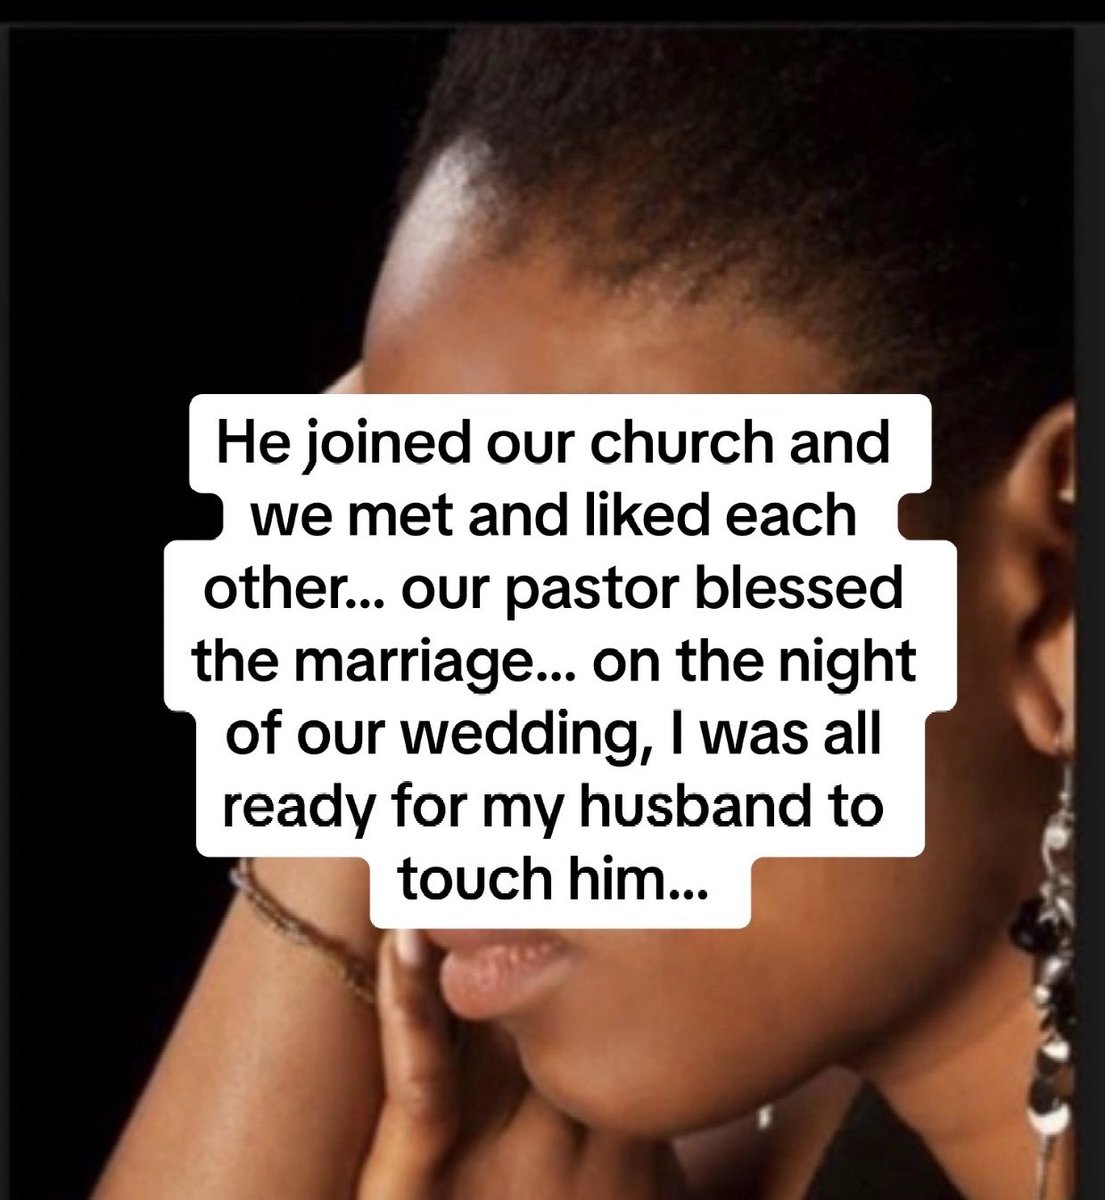 Lady shares a story of how her husband has never made love to her since they got married Read till the end You'll be shocked😱